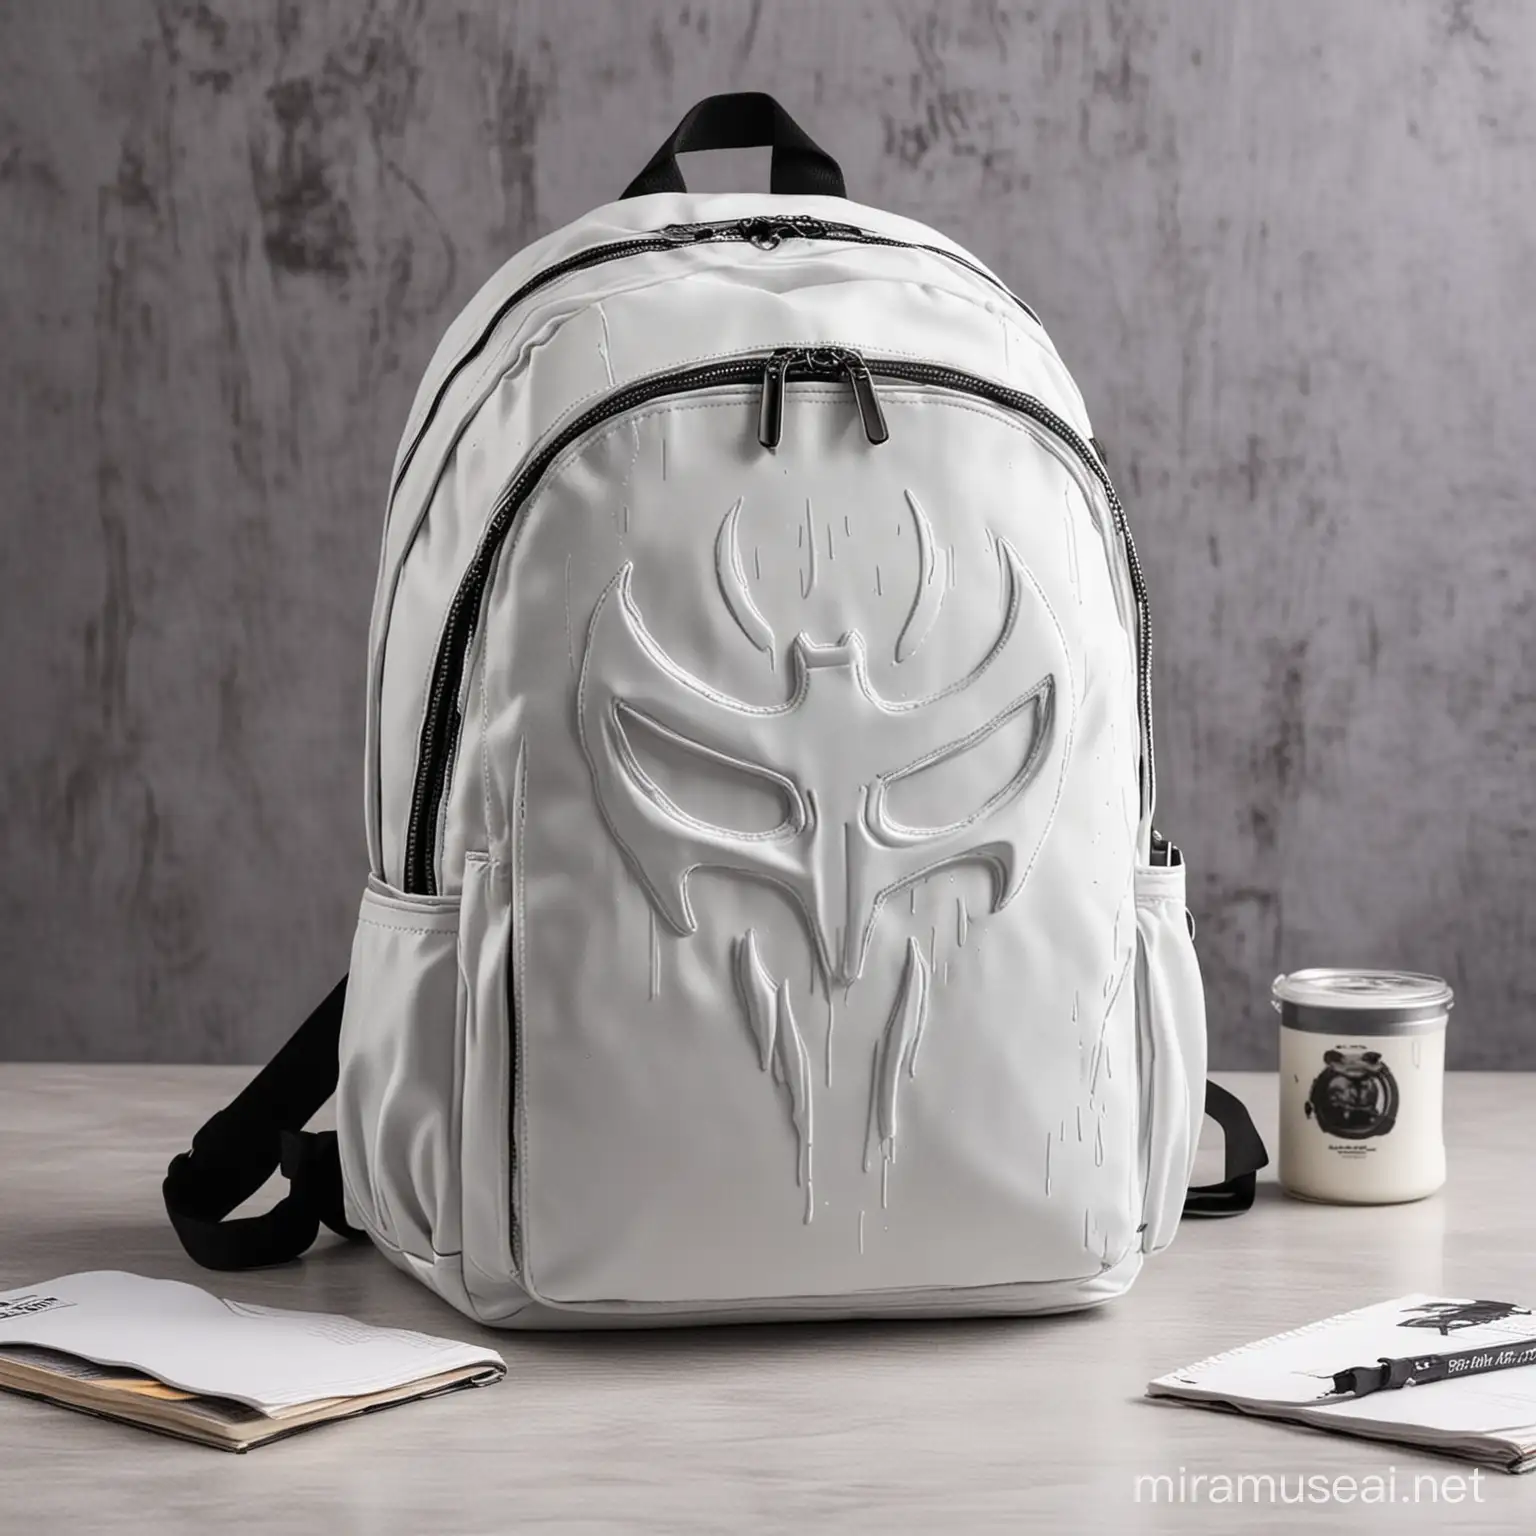 Moon Knight Style Backpack on The Table